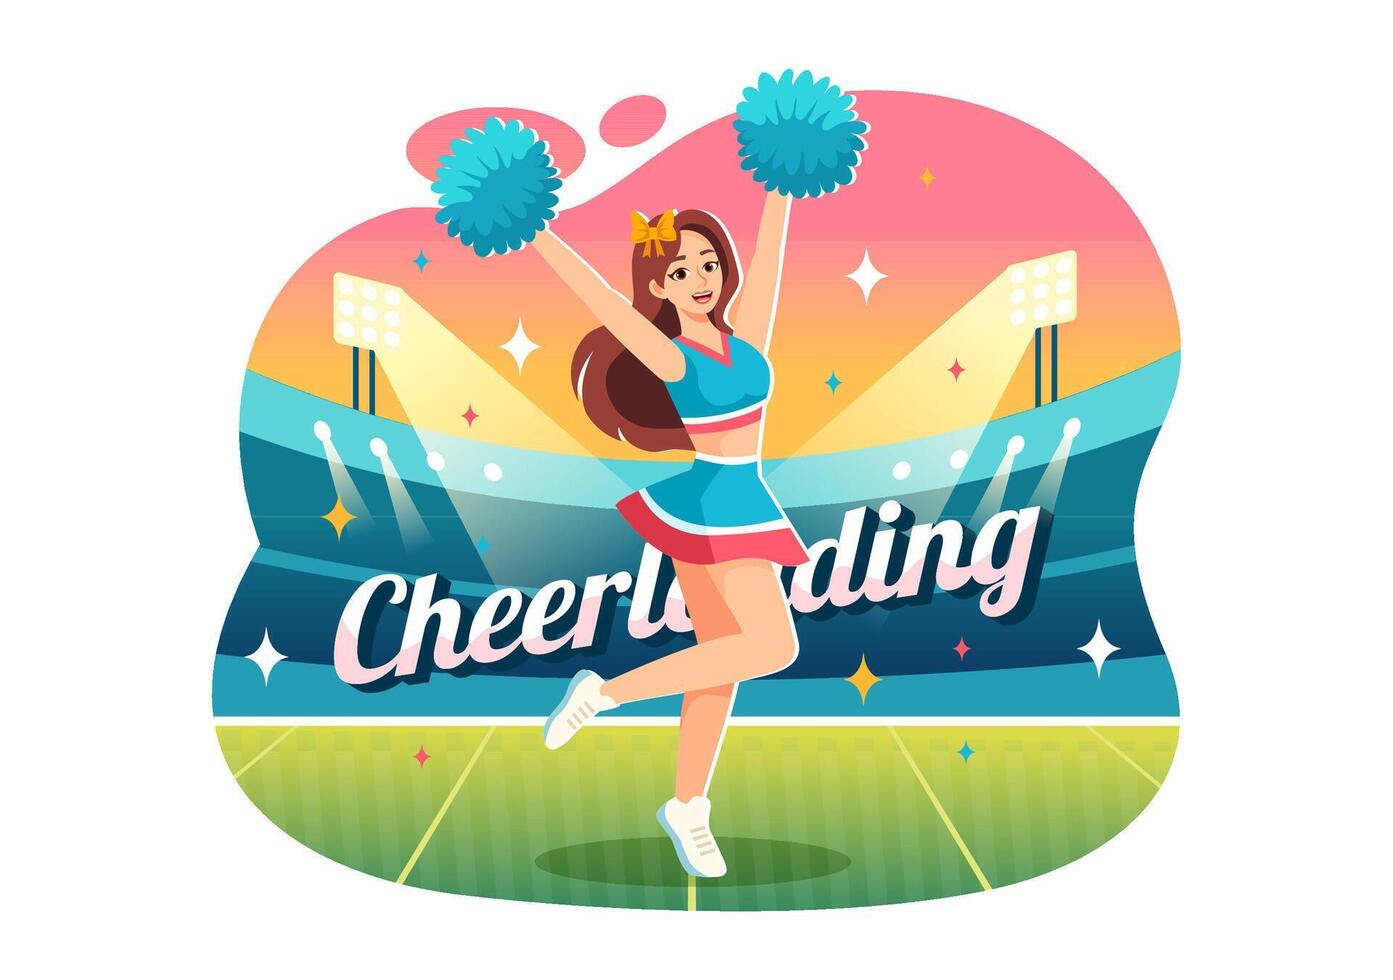 Cheerleader Girl Illustration with Cheerleading Pom Poms of Dancing and Jumping to Support Team Sport During Competition on Flat Background vector